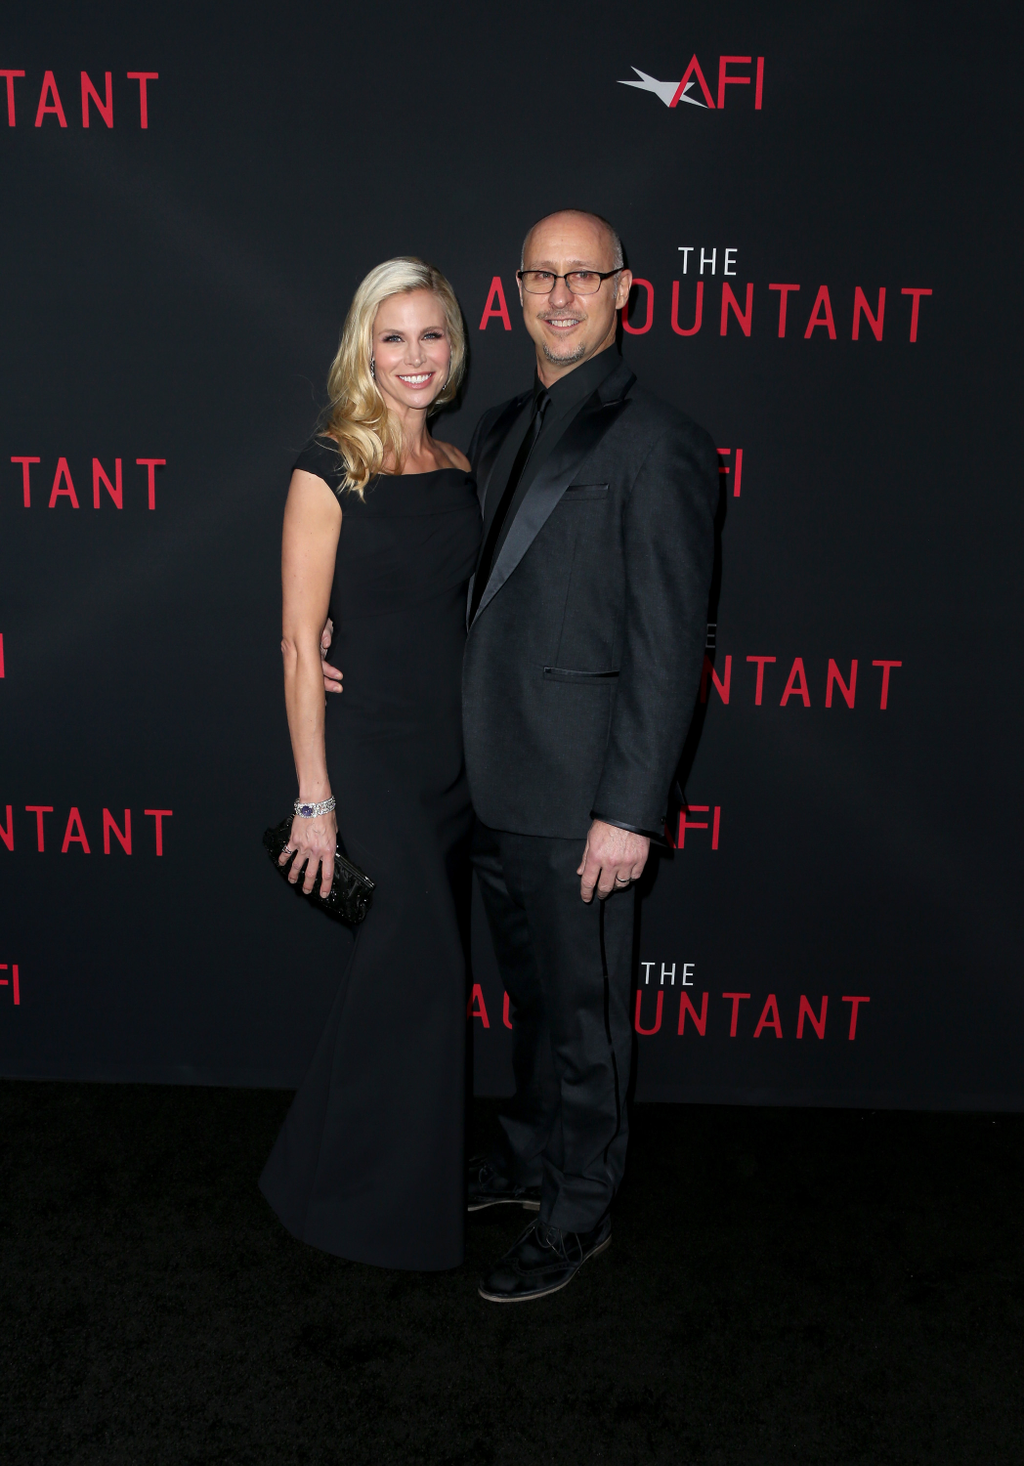 Premiere Of Warner Bros Pictures' "The Accountant" - Arrivals GettyImageRank2 Arts Culture and Entertainment Celebrities Film Industry 